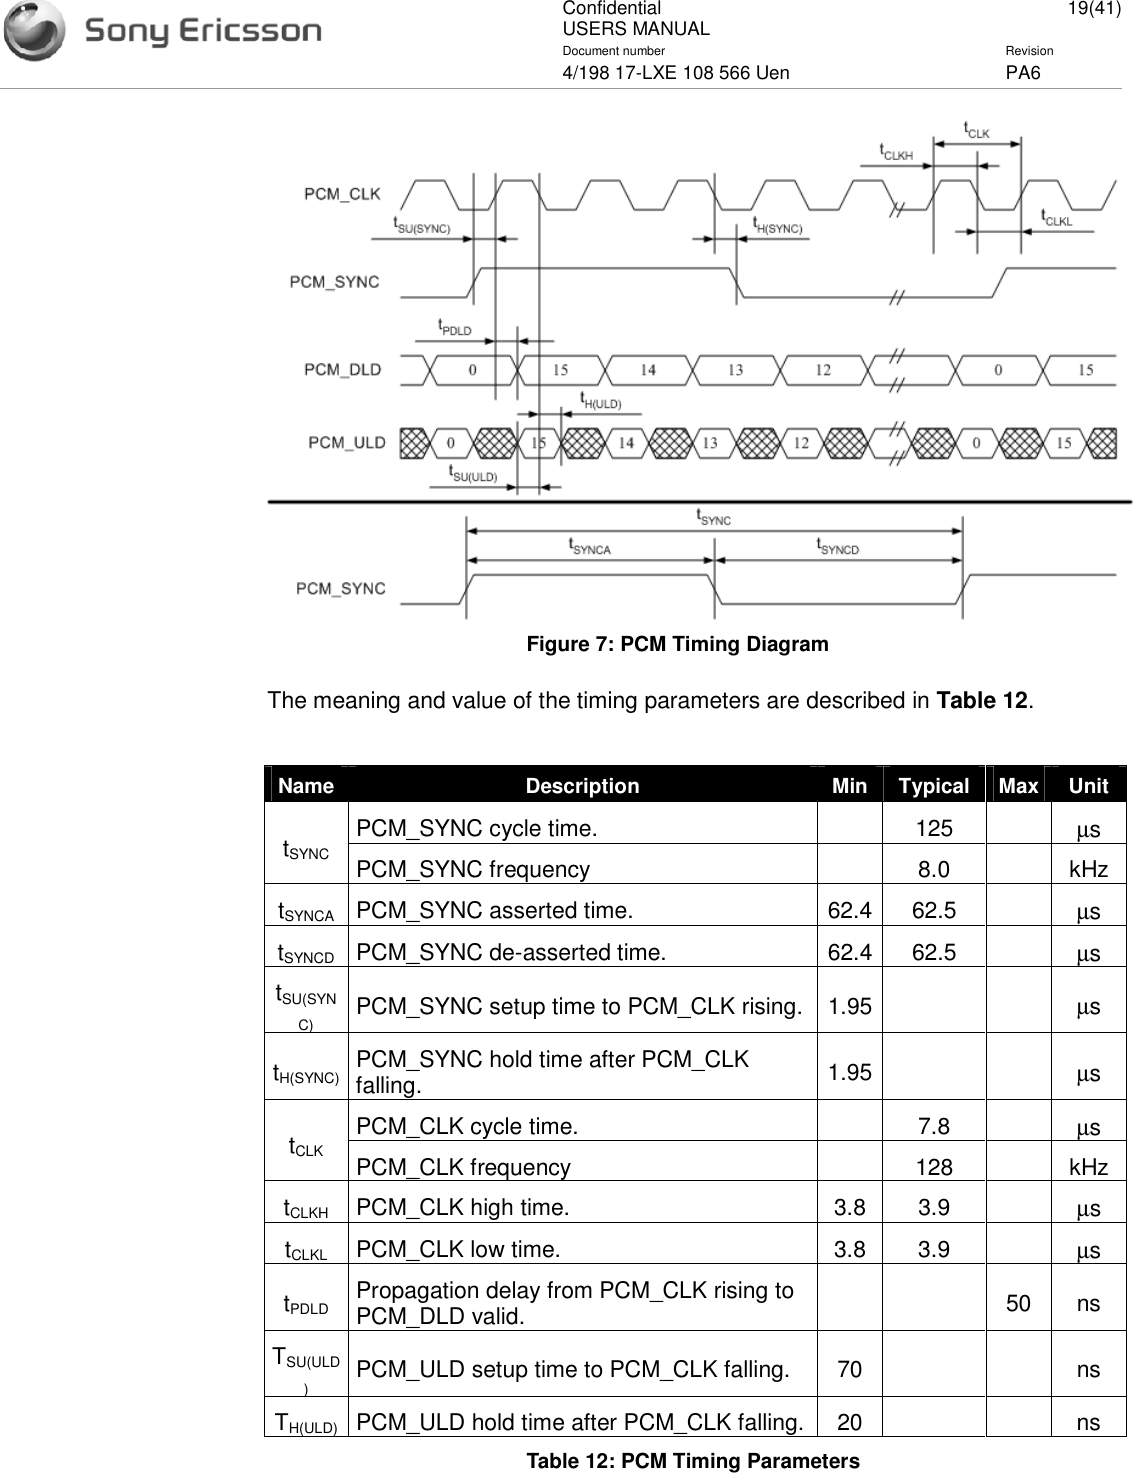 ConfidentialUSERS MANUAL 19(41)Document number Revision4/198 17-LXE 108 566 Uen PA6Figure 7: PCM Timing DiagramThe meaning and value of the timing parameters are described in Table 12.Name Description Min Typical Max UnitPCM_SYNC cycle time. 125 µstSYNC PCM_SYNC frequency 8.0 kHztSYNCA PCM_SYNC asserted time. 62.4 62.5 µstSYNCD PCM_SYNC de-asserted time. 62.4 62.5 µstSU(SYNC) PCM_SYNC setup time to PCM_CLK rising. 1.95 µstH(SYNC) PCM_SYNC hold time after PCM_CLKfalling. 1.95 µsPCM_CLK cycle time. 7.8 µstCLK PCM_CLK frequency 128 kHztCLKH PCM_CLK high time. 3.8 3.9 µstCLKL PCM_CLK low time. 3.8 3.9 µstPDLD Propagation delay from PCM_CLK rising toPCM_DLD valid. 50 nsTSU(ULD)PCM_ULD setup time to PCM_CLK falling. 70 nsTH(ULD) PCM_ULD hold time after PCM_CLK falling. 20 nsTable 12: PCM Timing Parameters